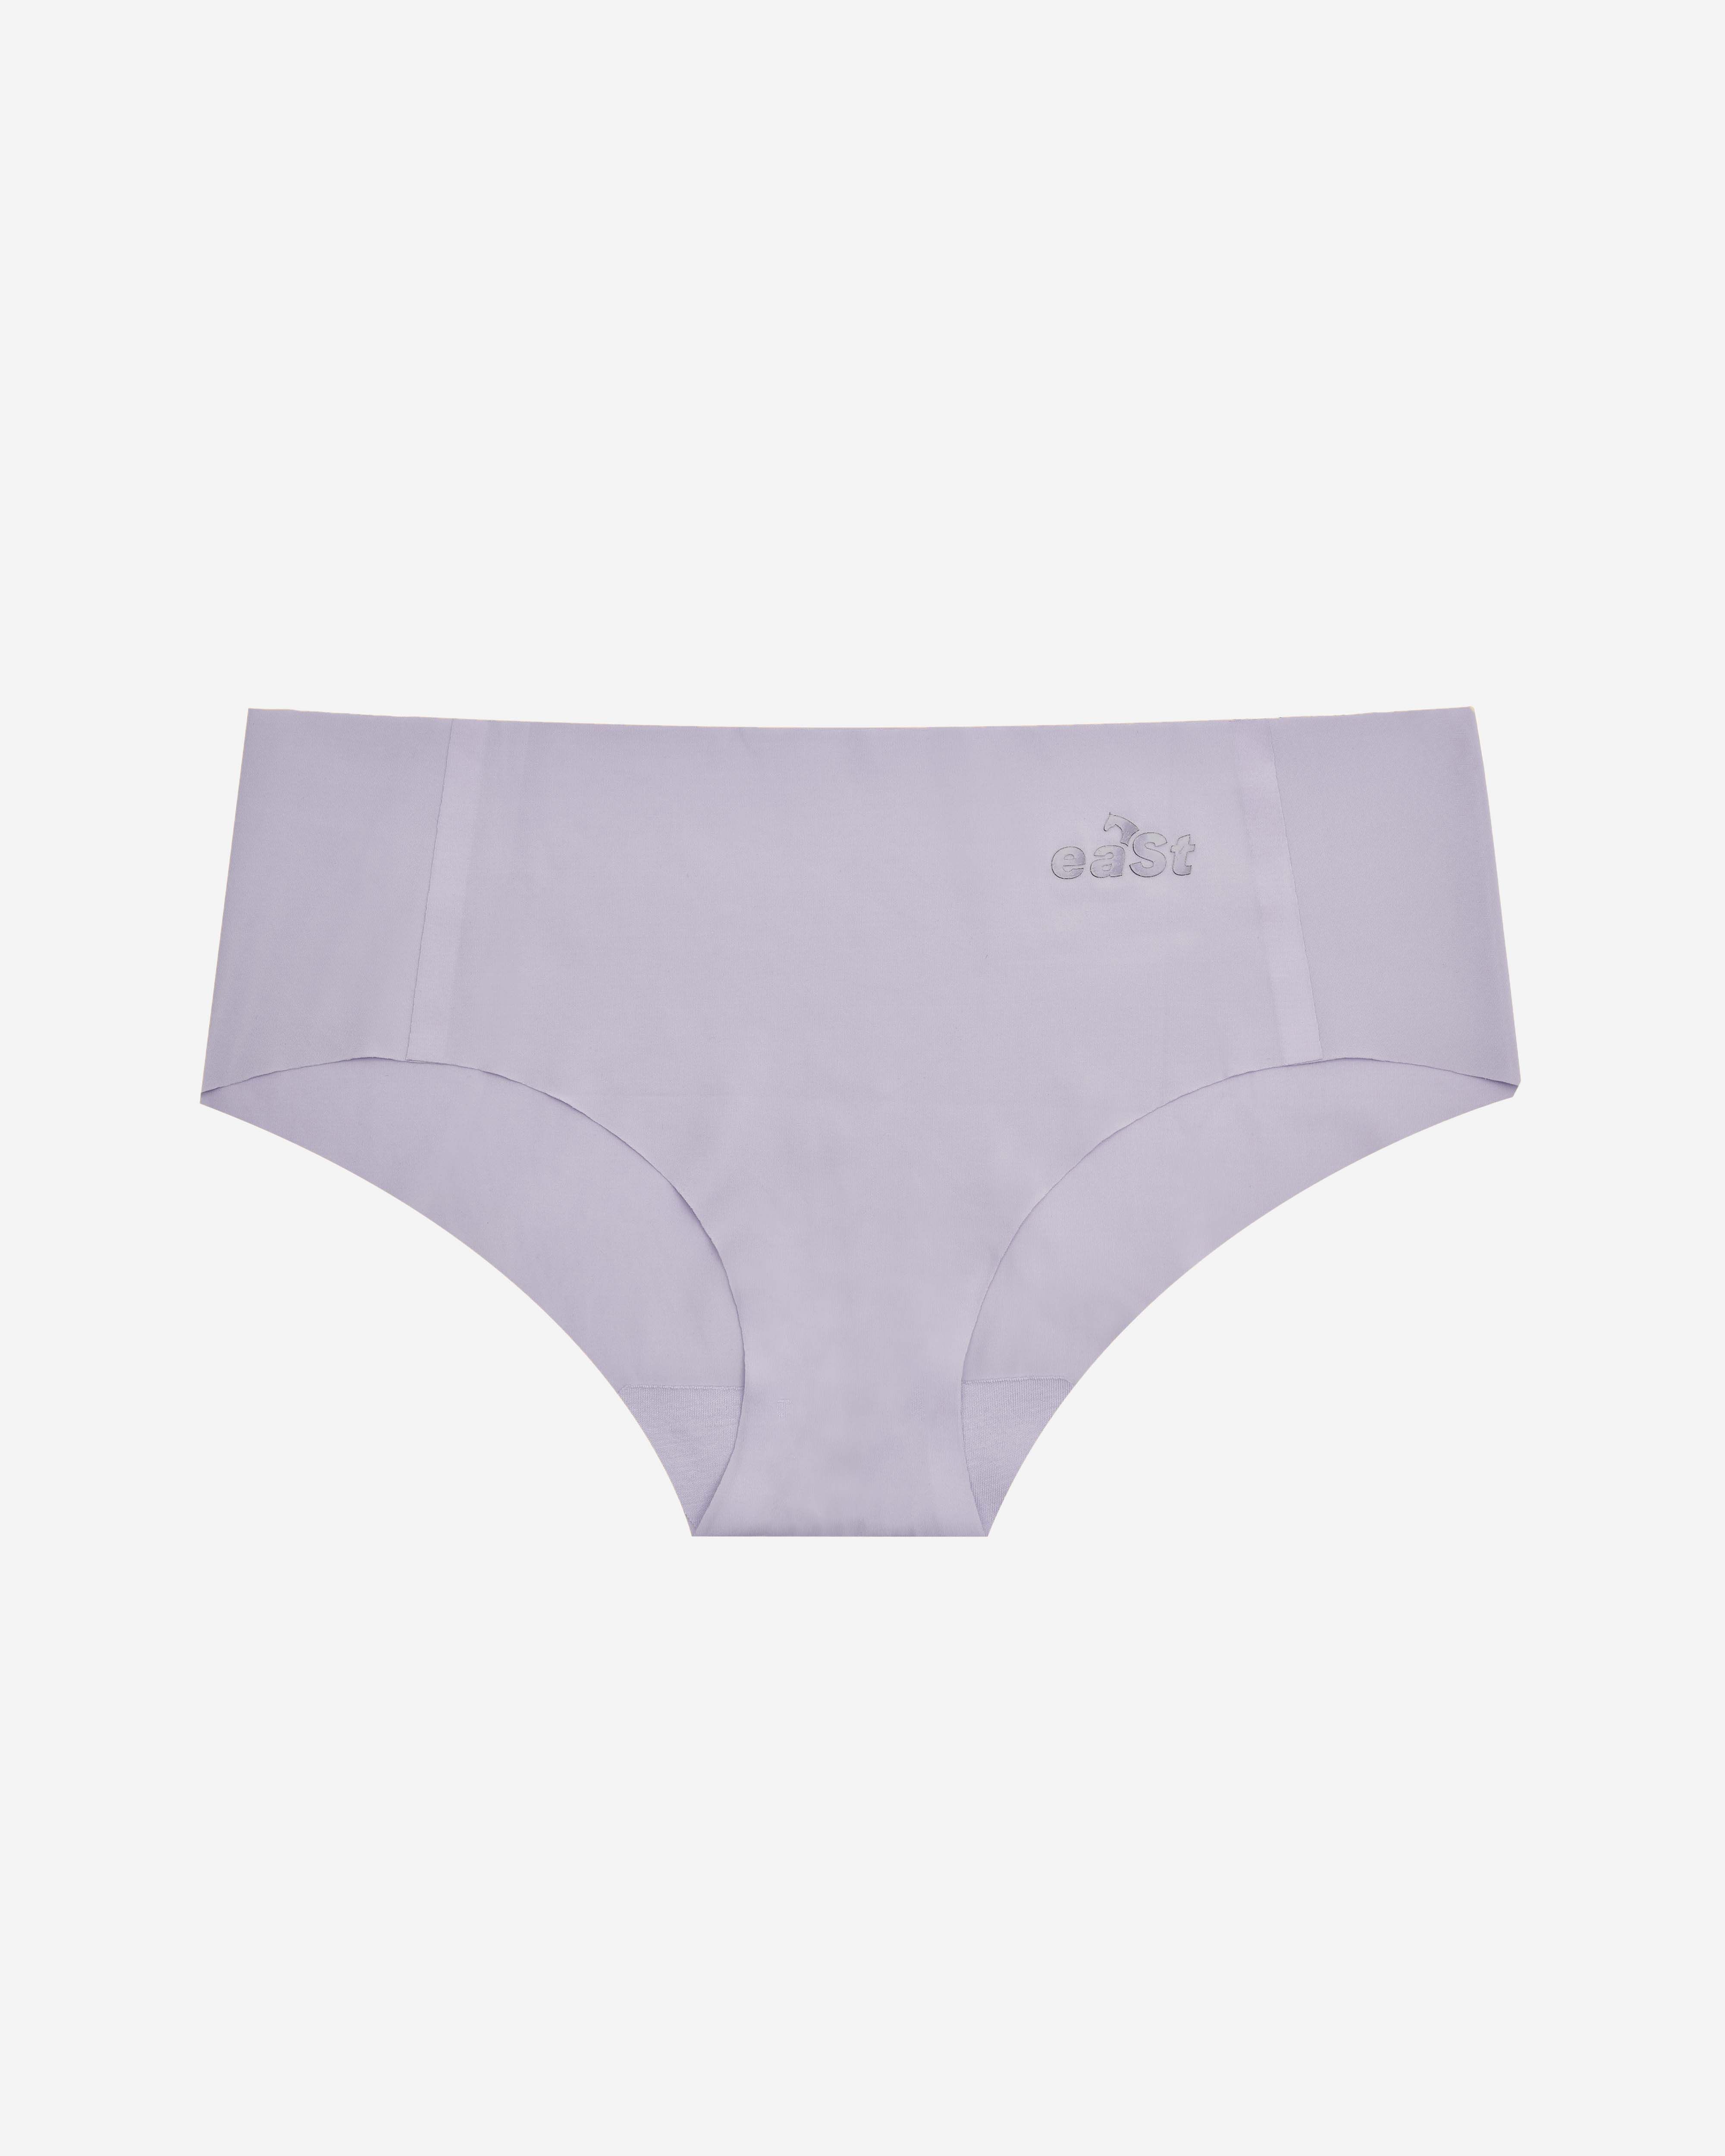 eaSt Performance Panty | Lavender | S